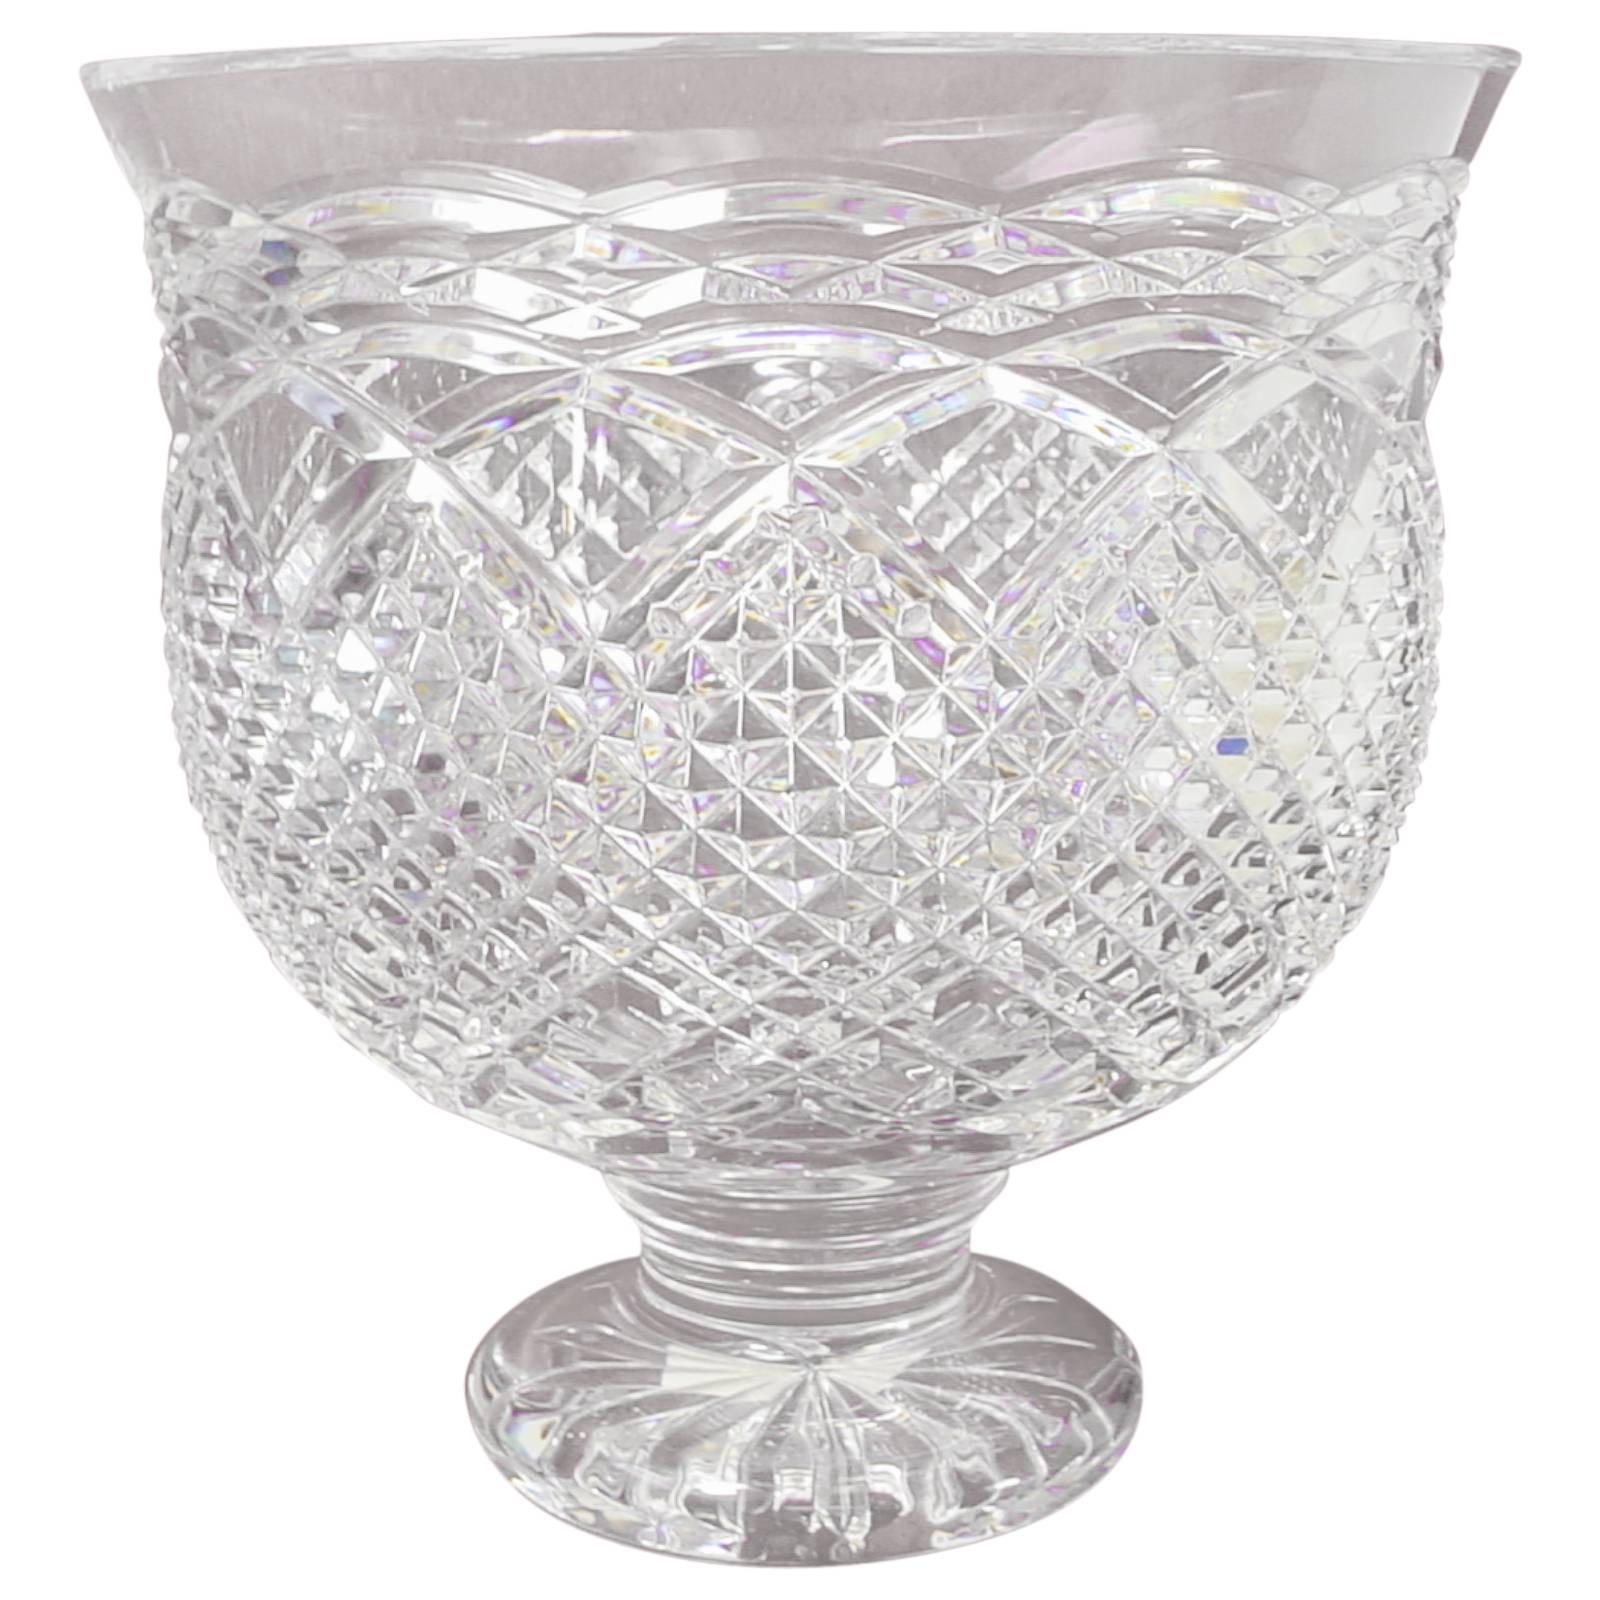 Waterford Crystal Designers Gallery Collection Tom Brennan Rainbow Trifle Bowl For Sale